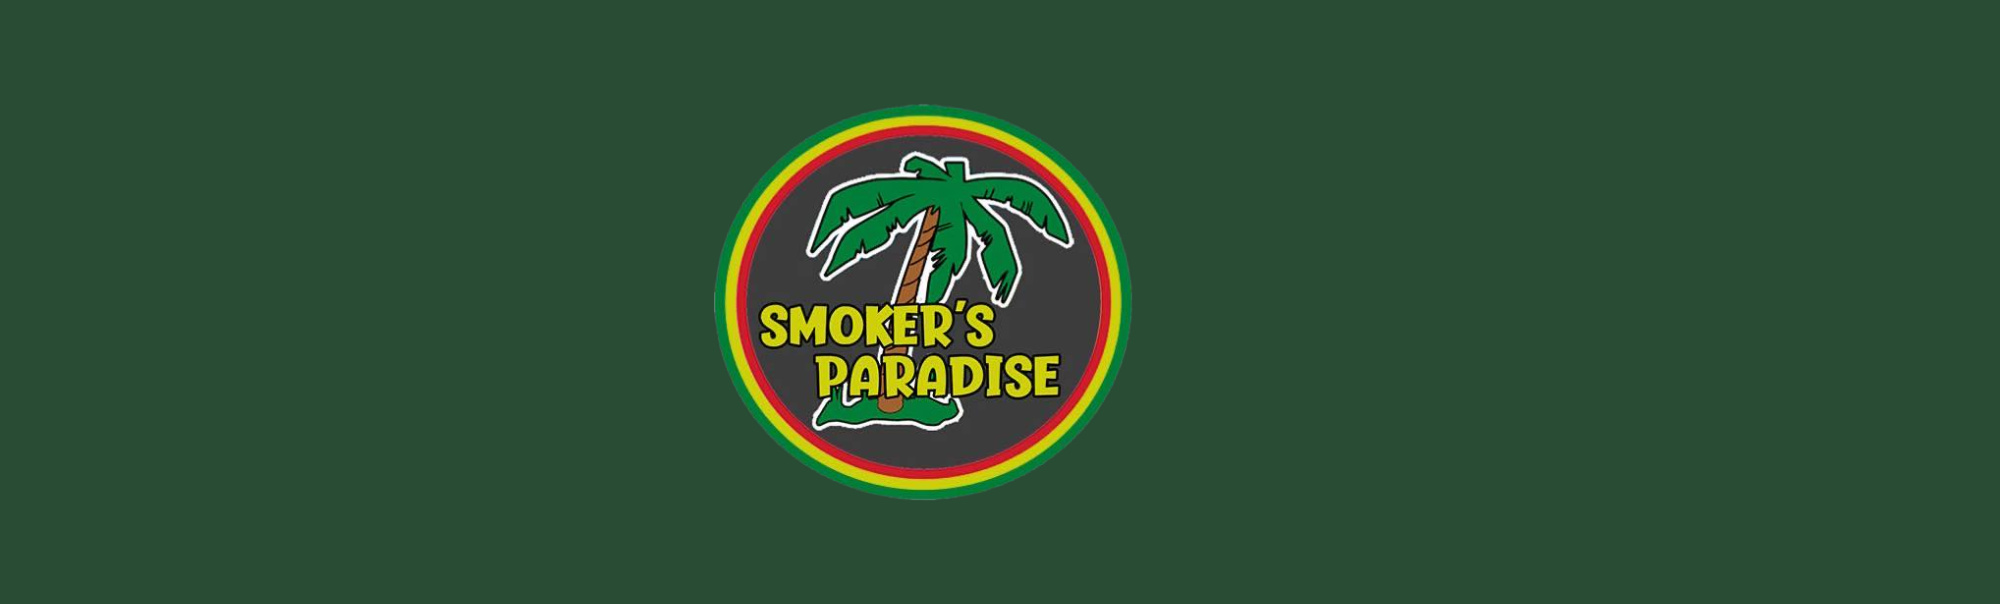 image of smokers paradise tobacco super center